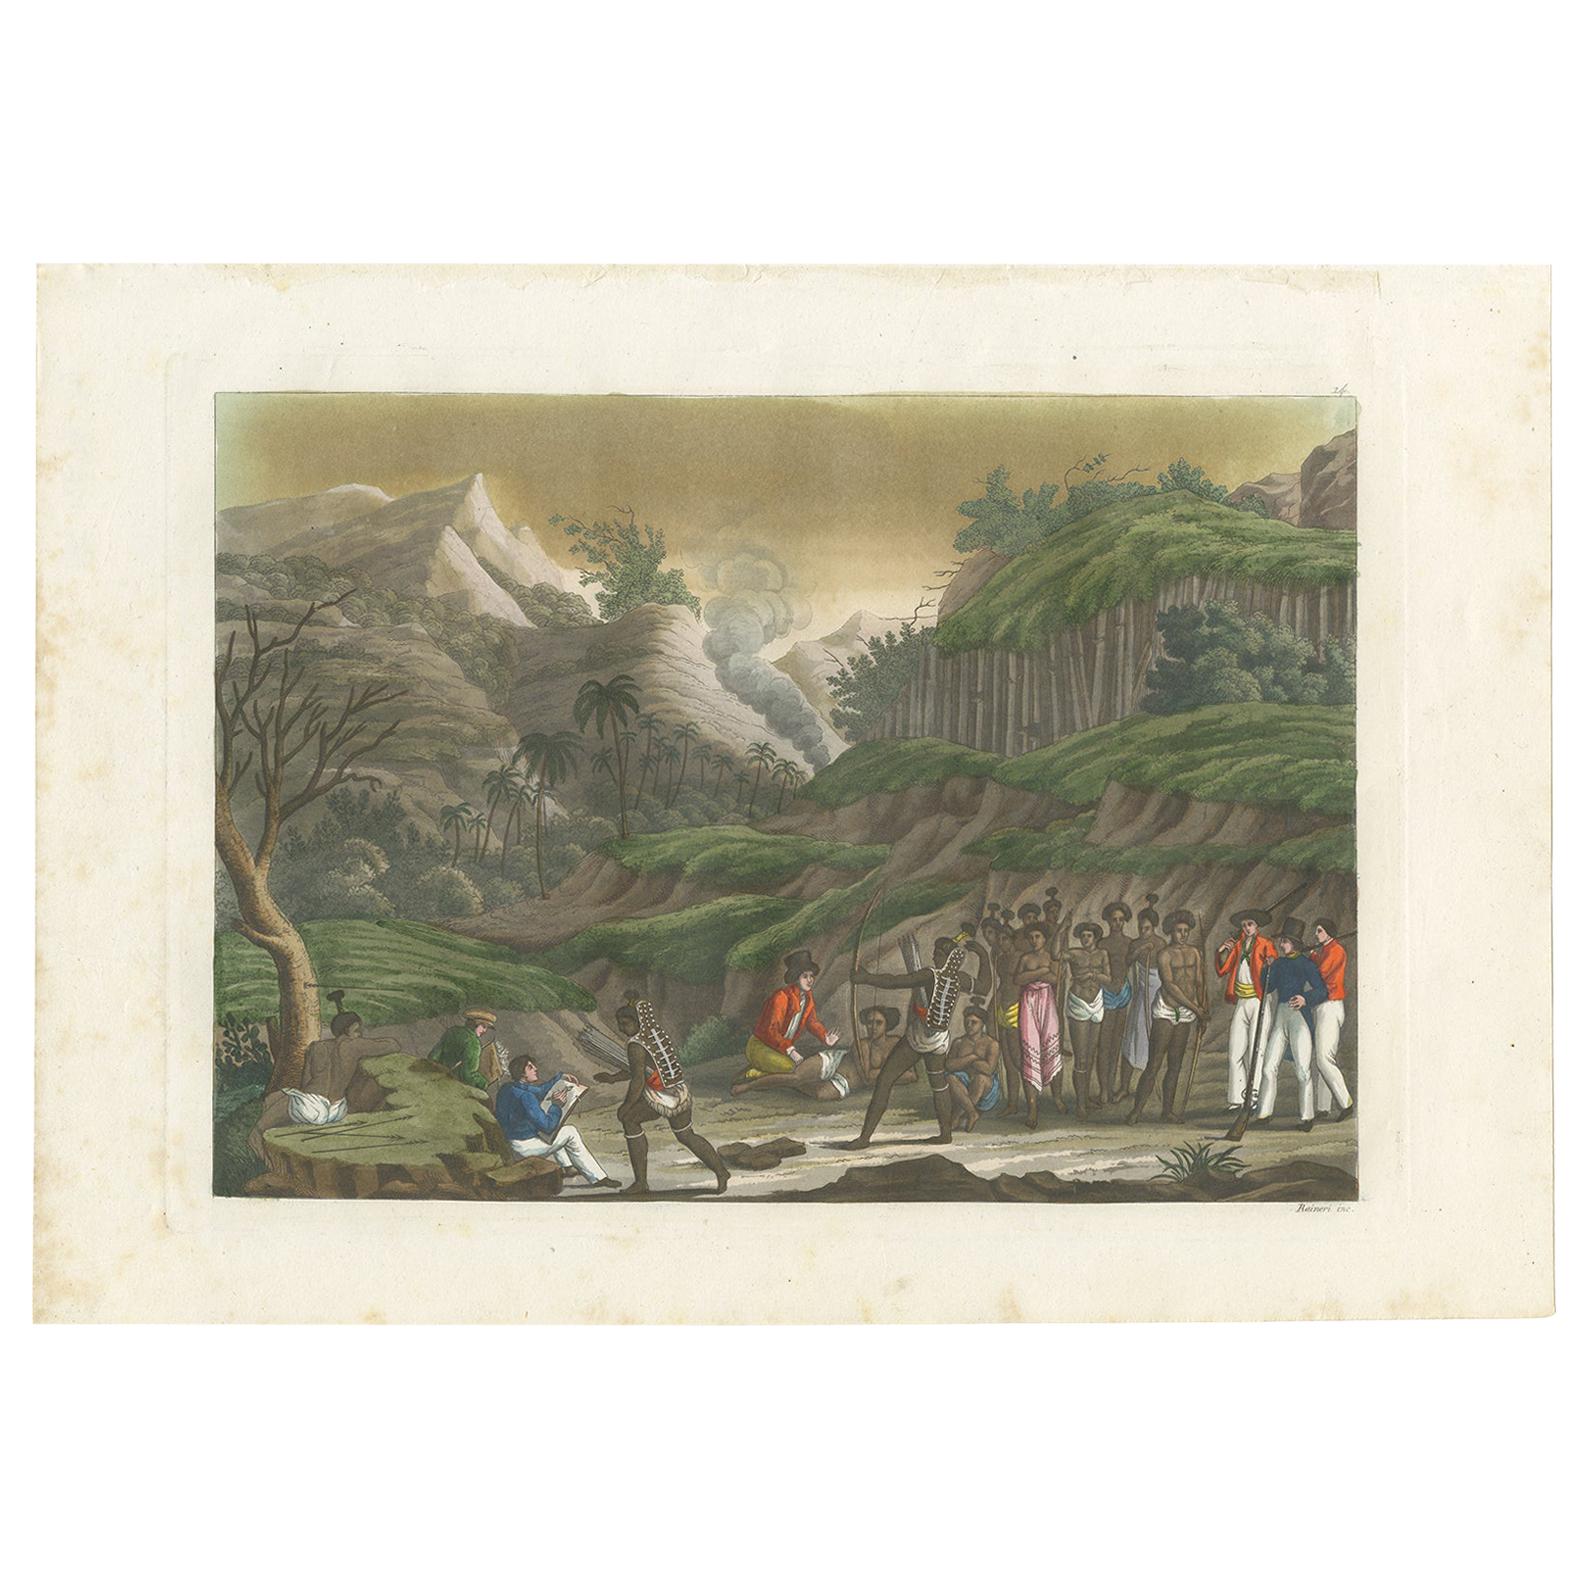 Antique Print of French Troops on Ombai Island by Ferrario, '1831'